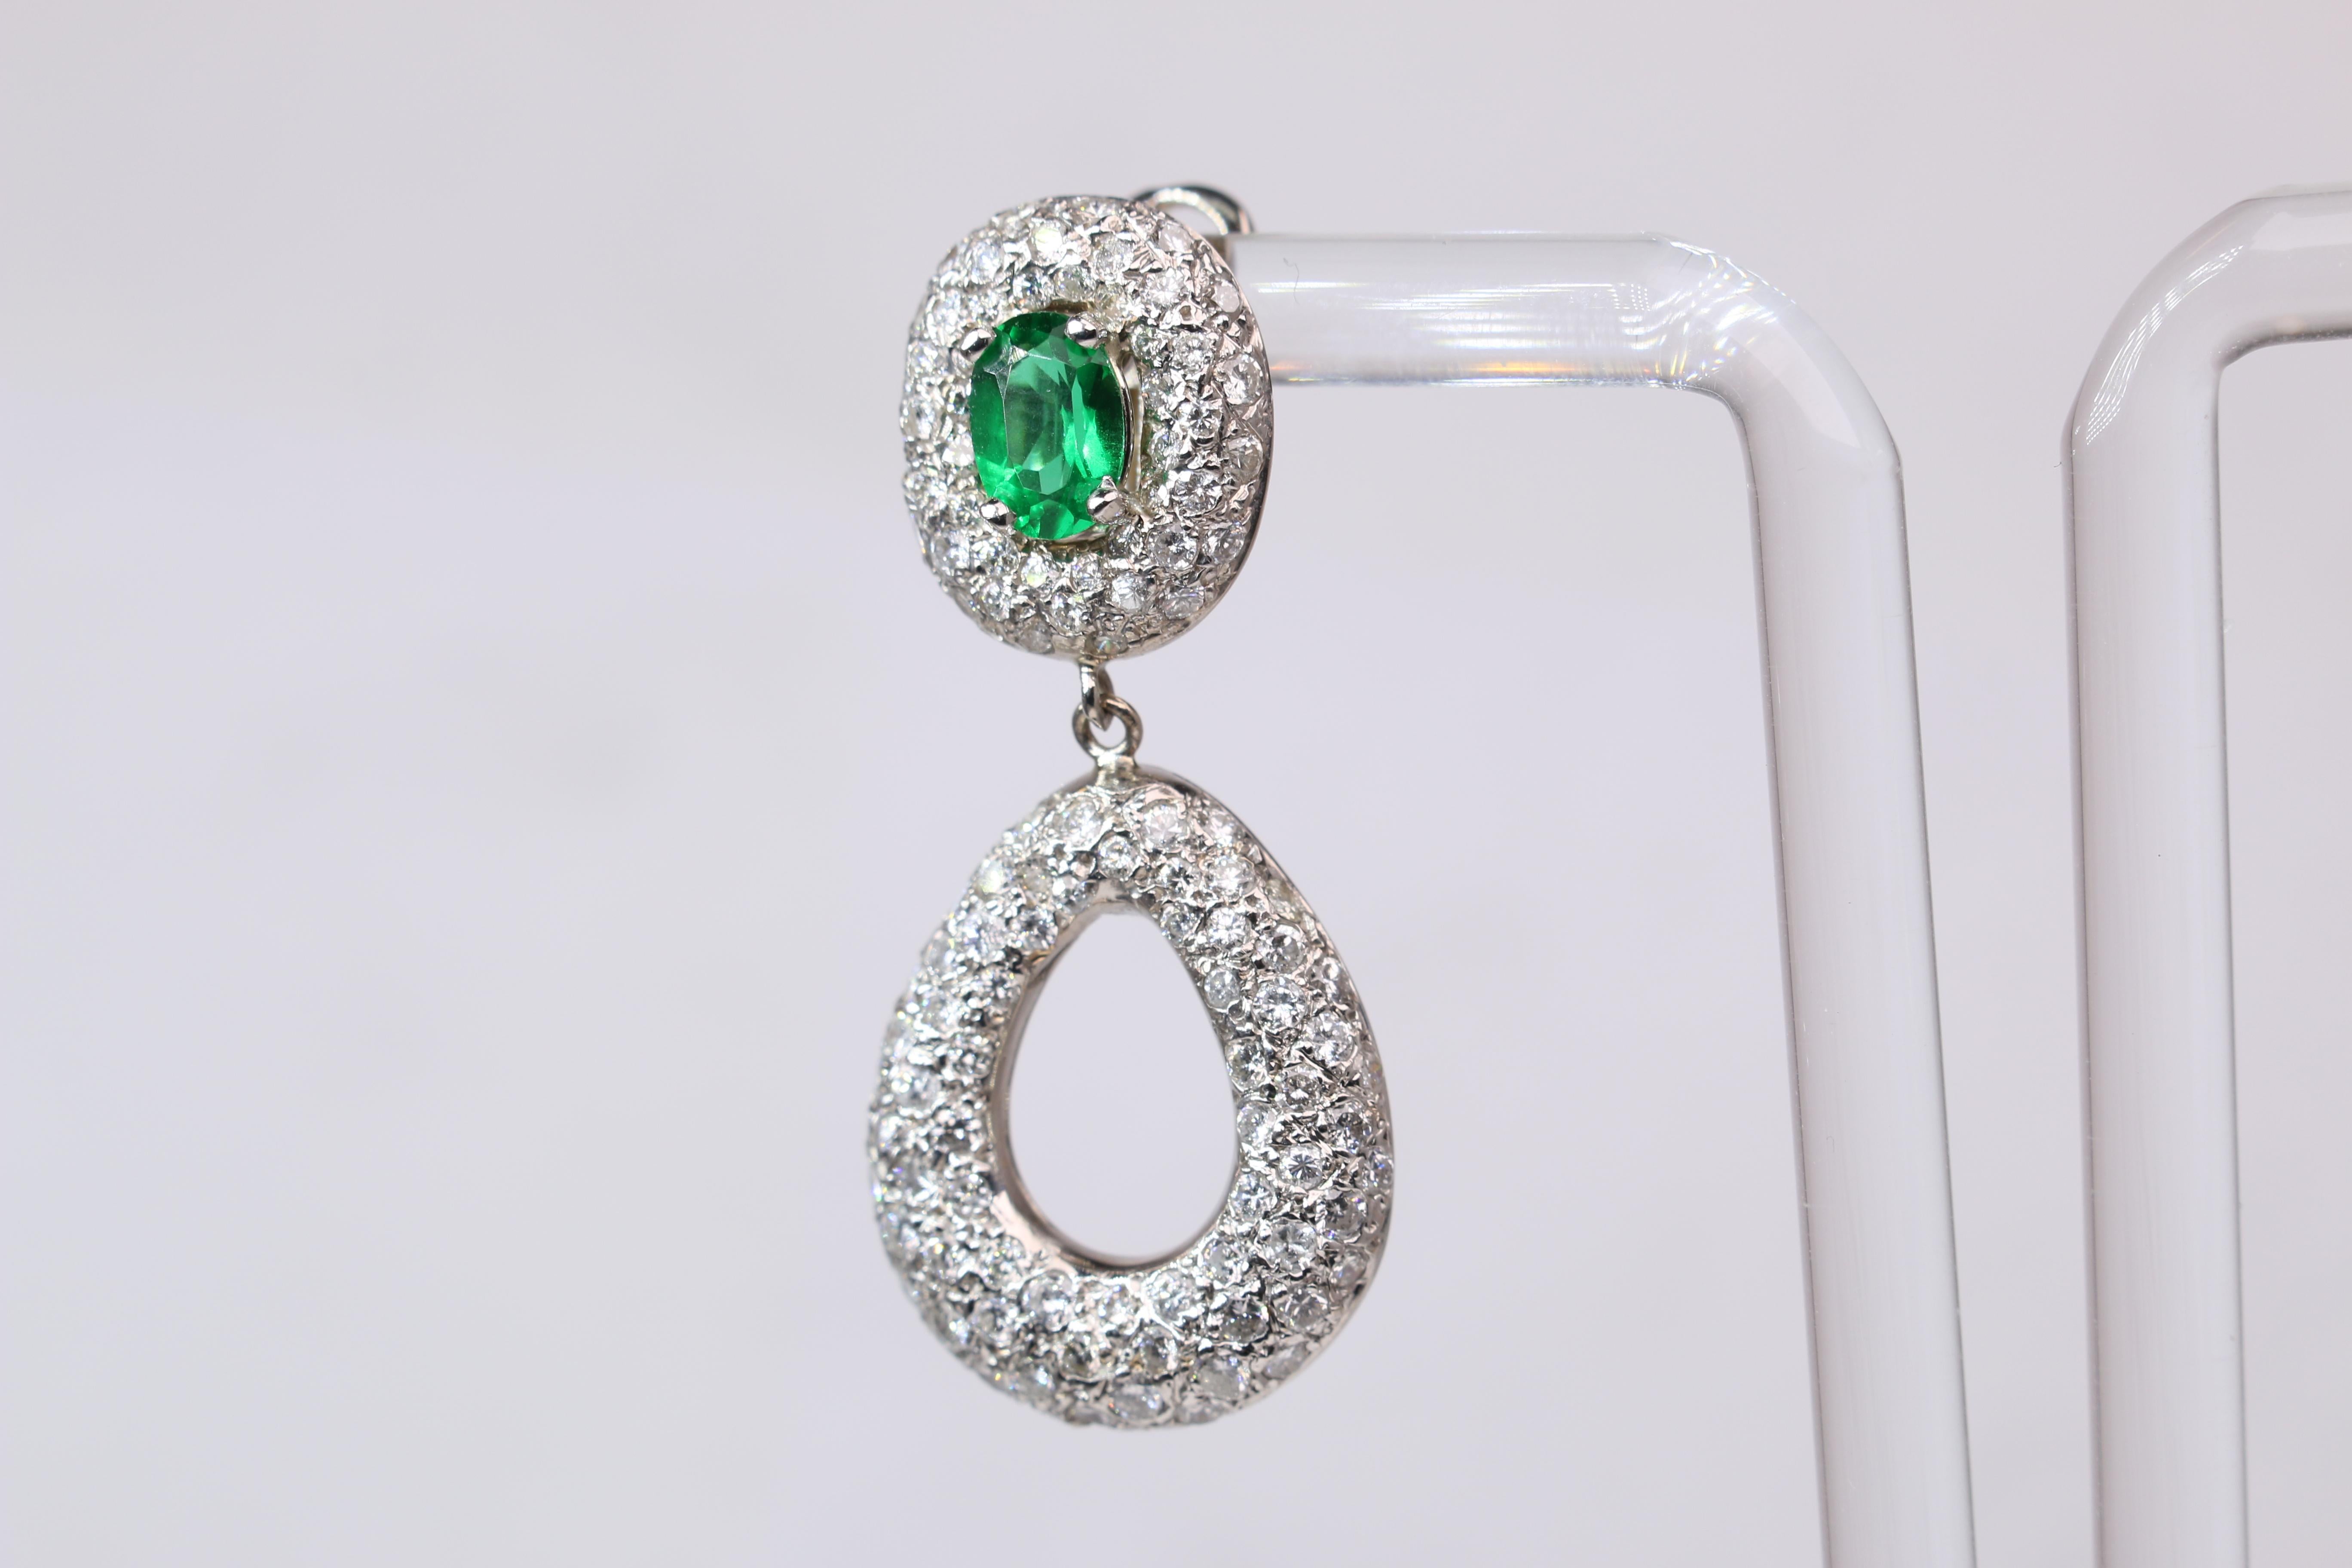 These stunning oval emerald and pave diamond earrings are set in 18k White Gold. The earrings weigh 13.2g in total and feature two oval cut emeralds measuring 7mm X 5mm. The earrings are 1.5 inches in length and 6/8 of an inch wide. A truly stunning